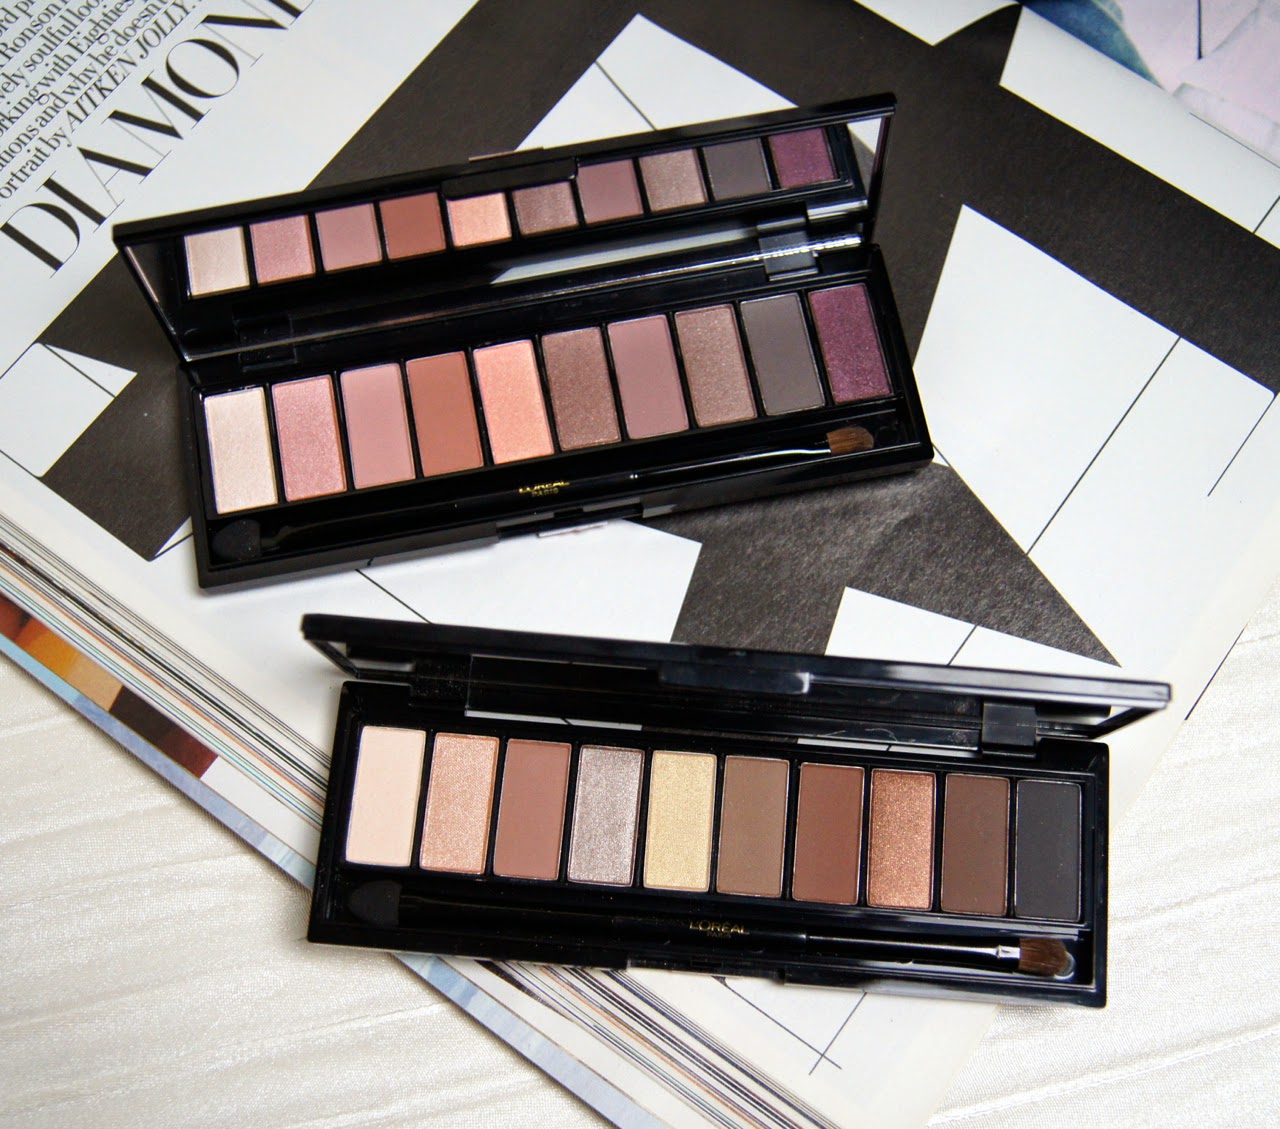 Creepers & Cupcakes: L OREAL LA PALETTE NUDE (ROSE 